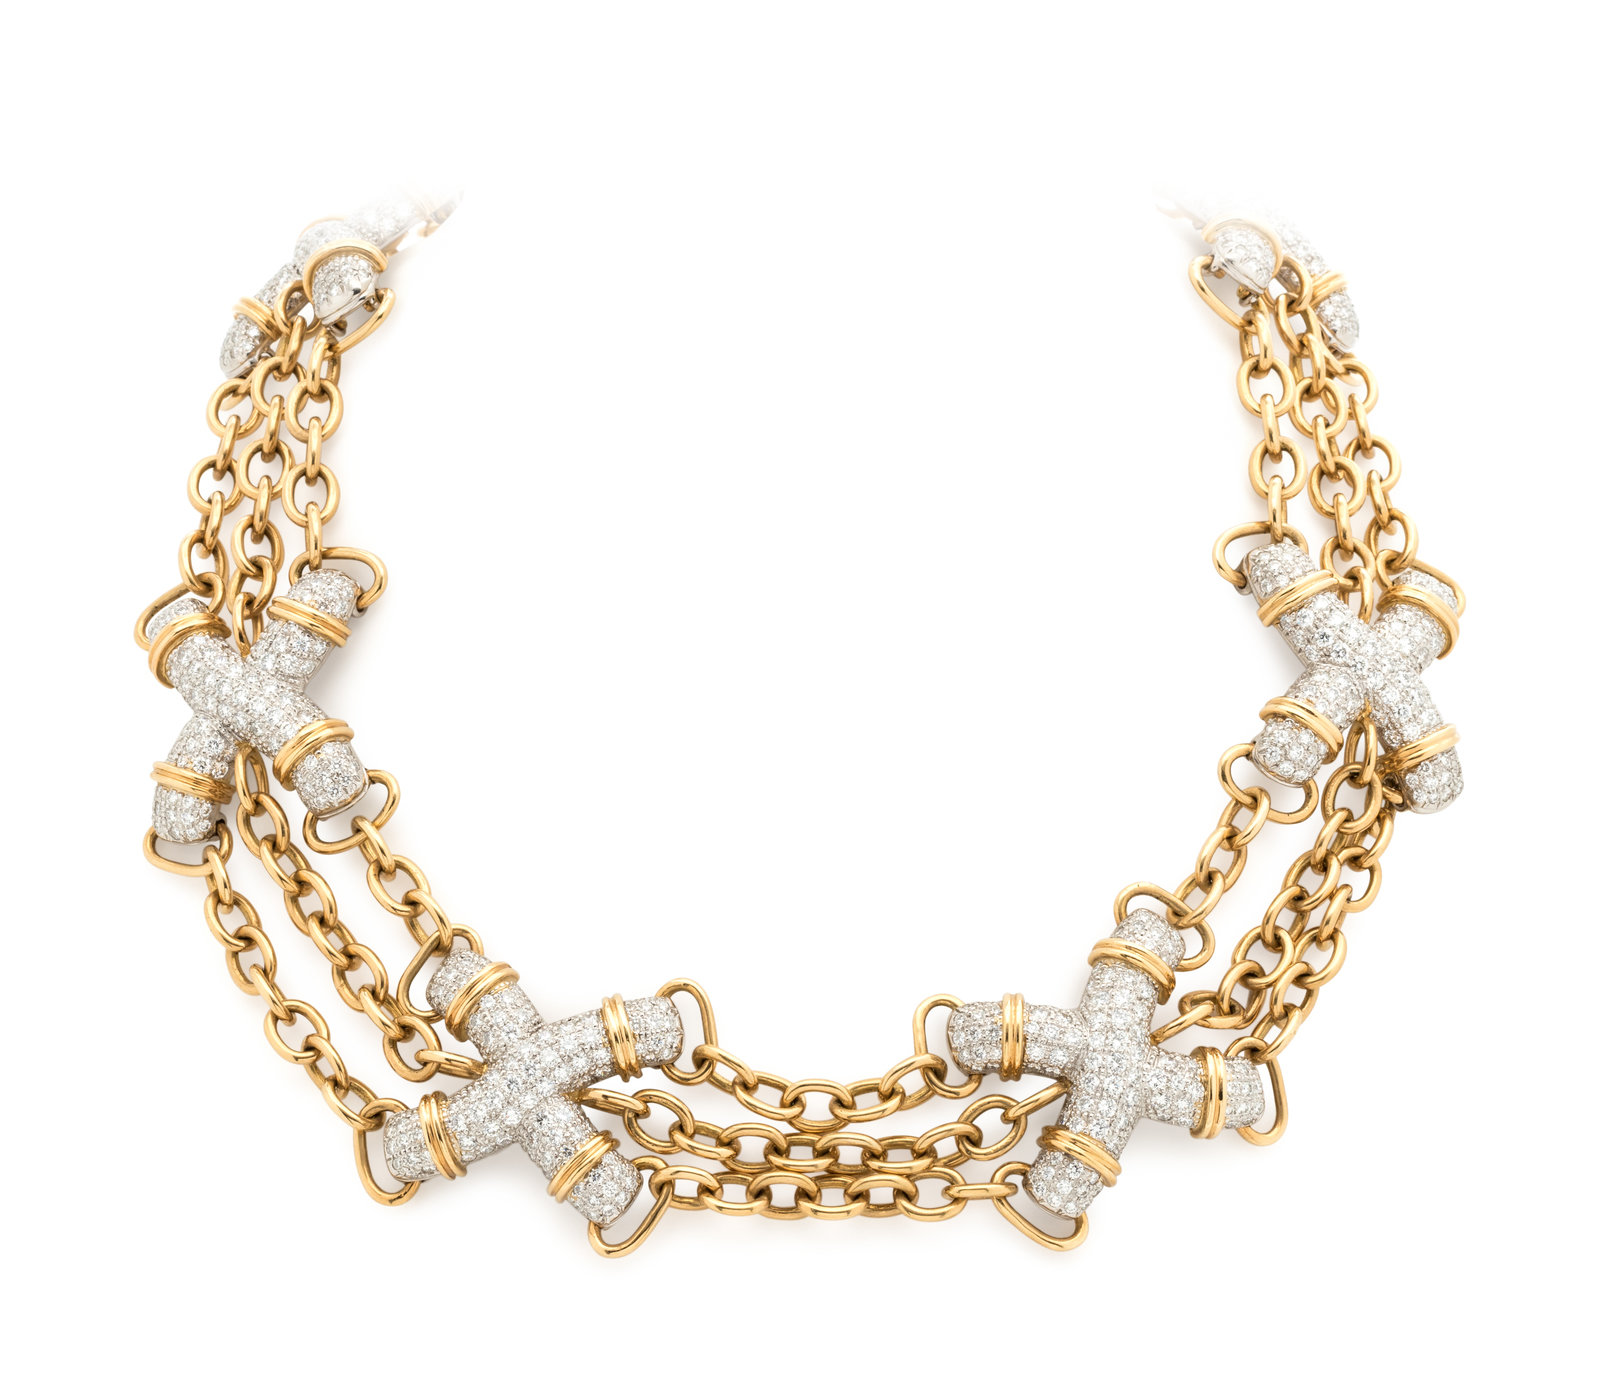 Jean Schlumberger for Tiffany & Co. X's & O's Necklace